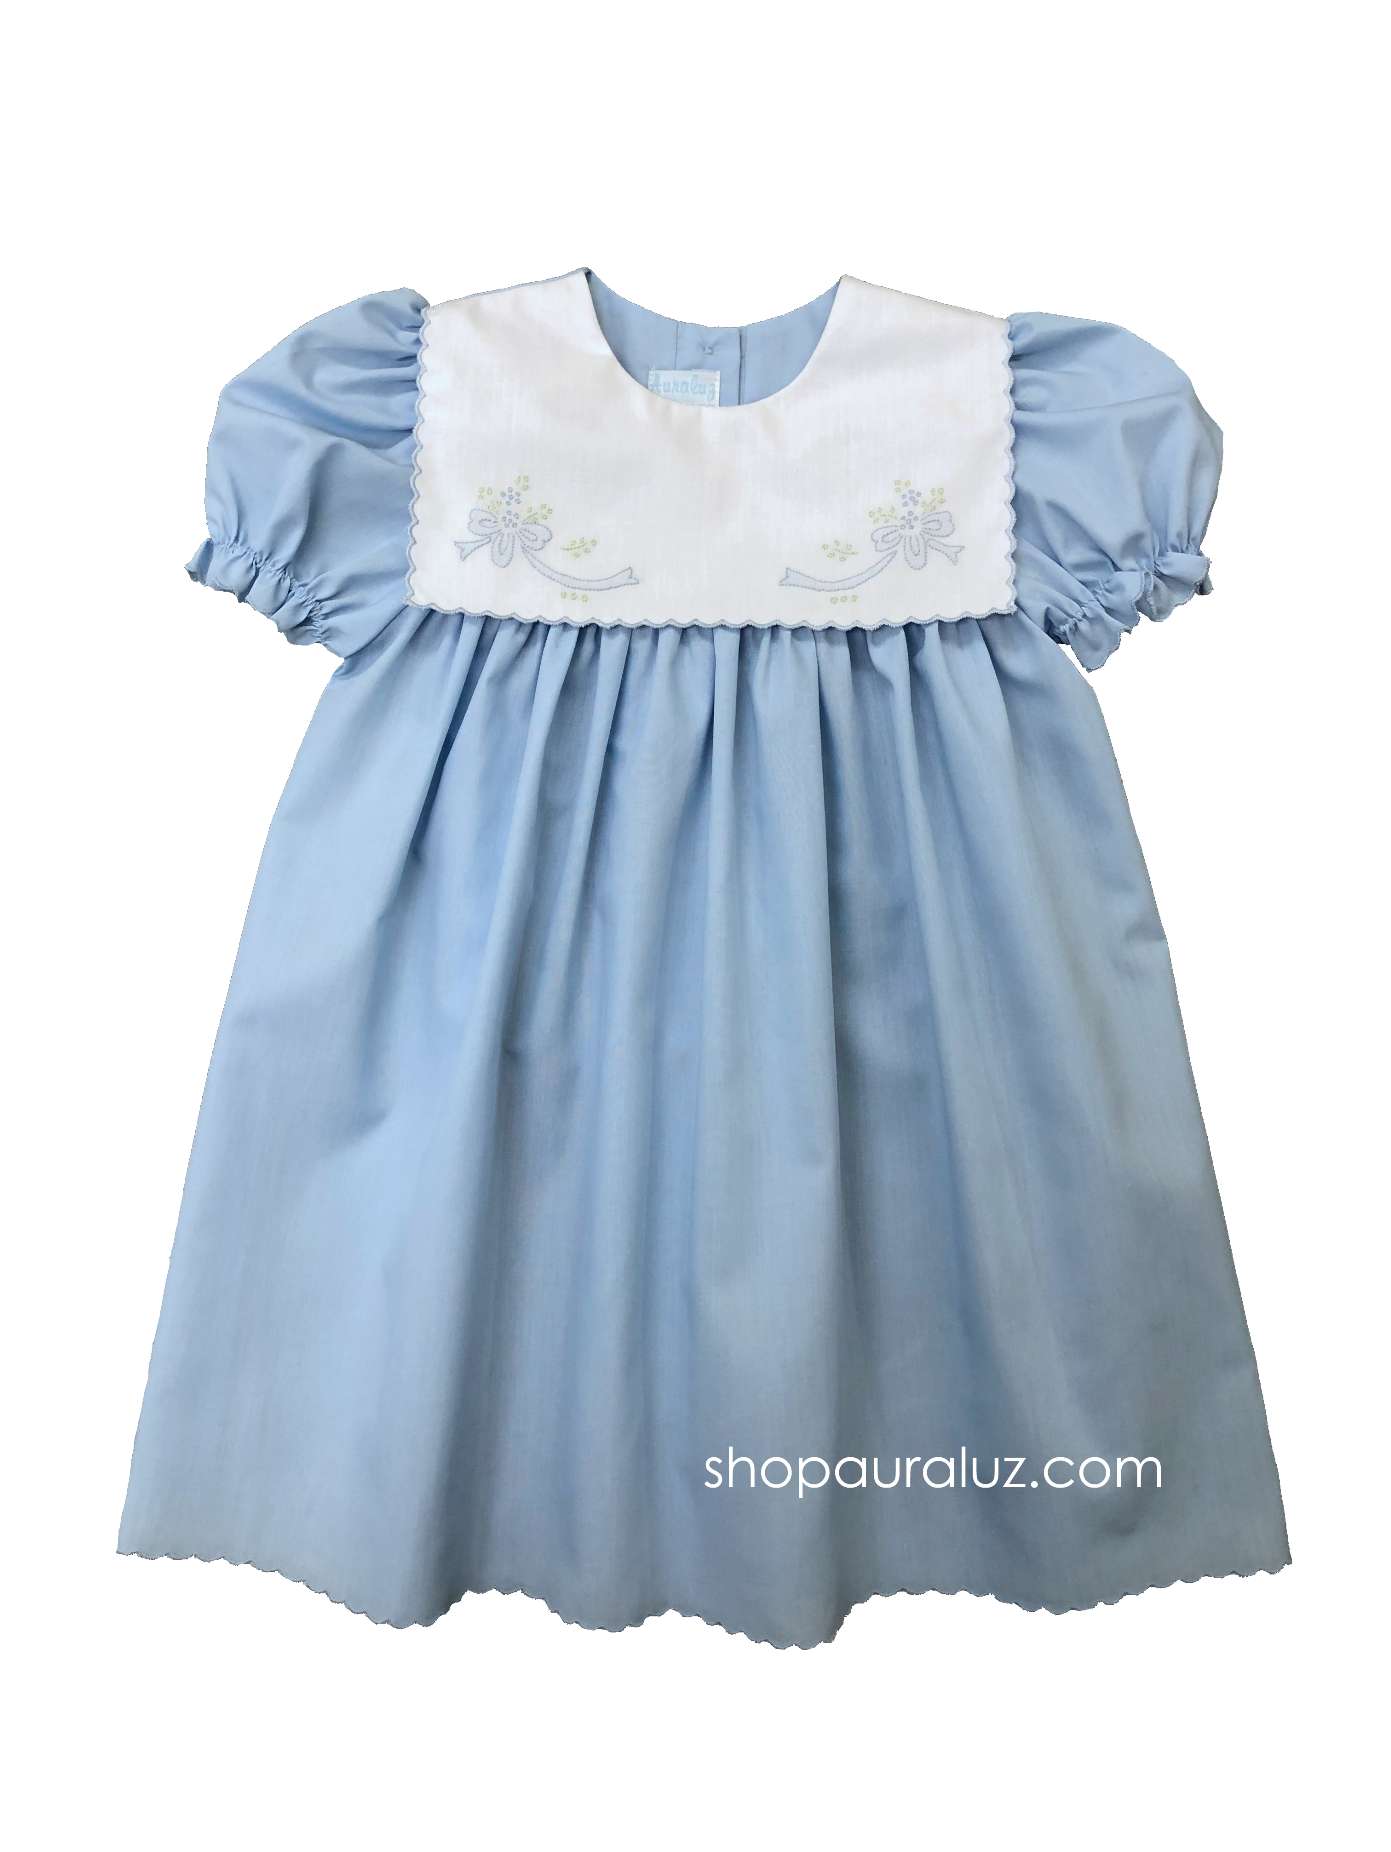 Auraluz Dress..Blue with white square collar and embroidered ribbon flowers